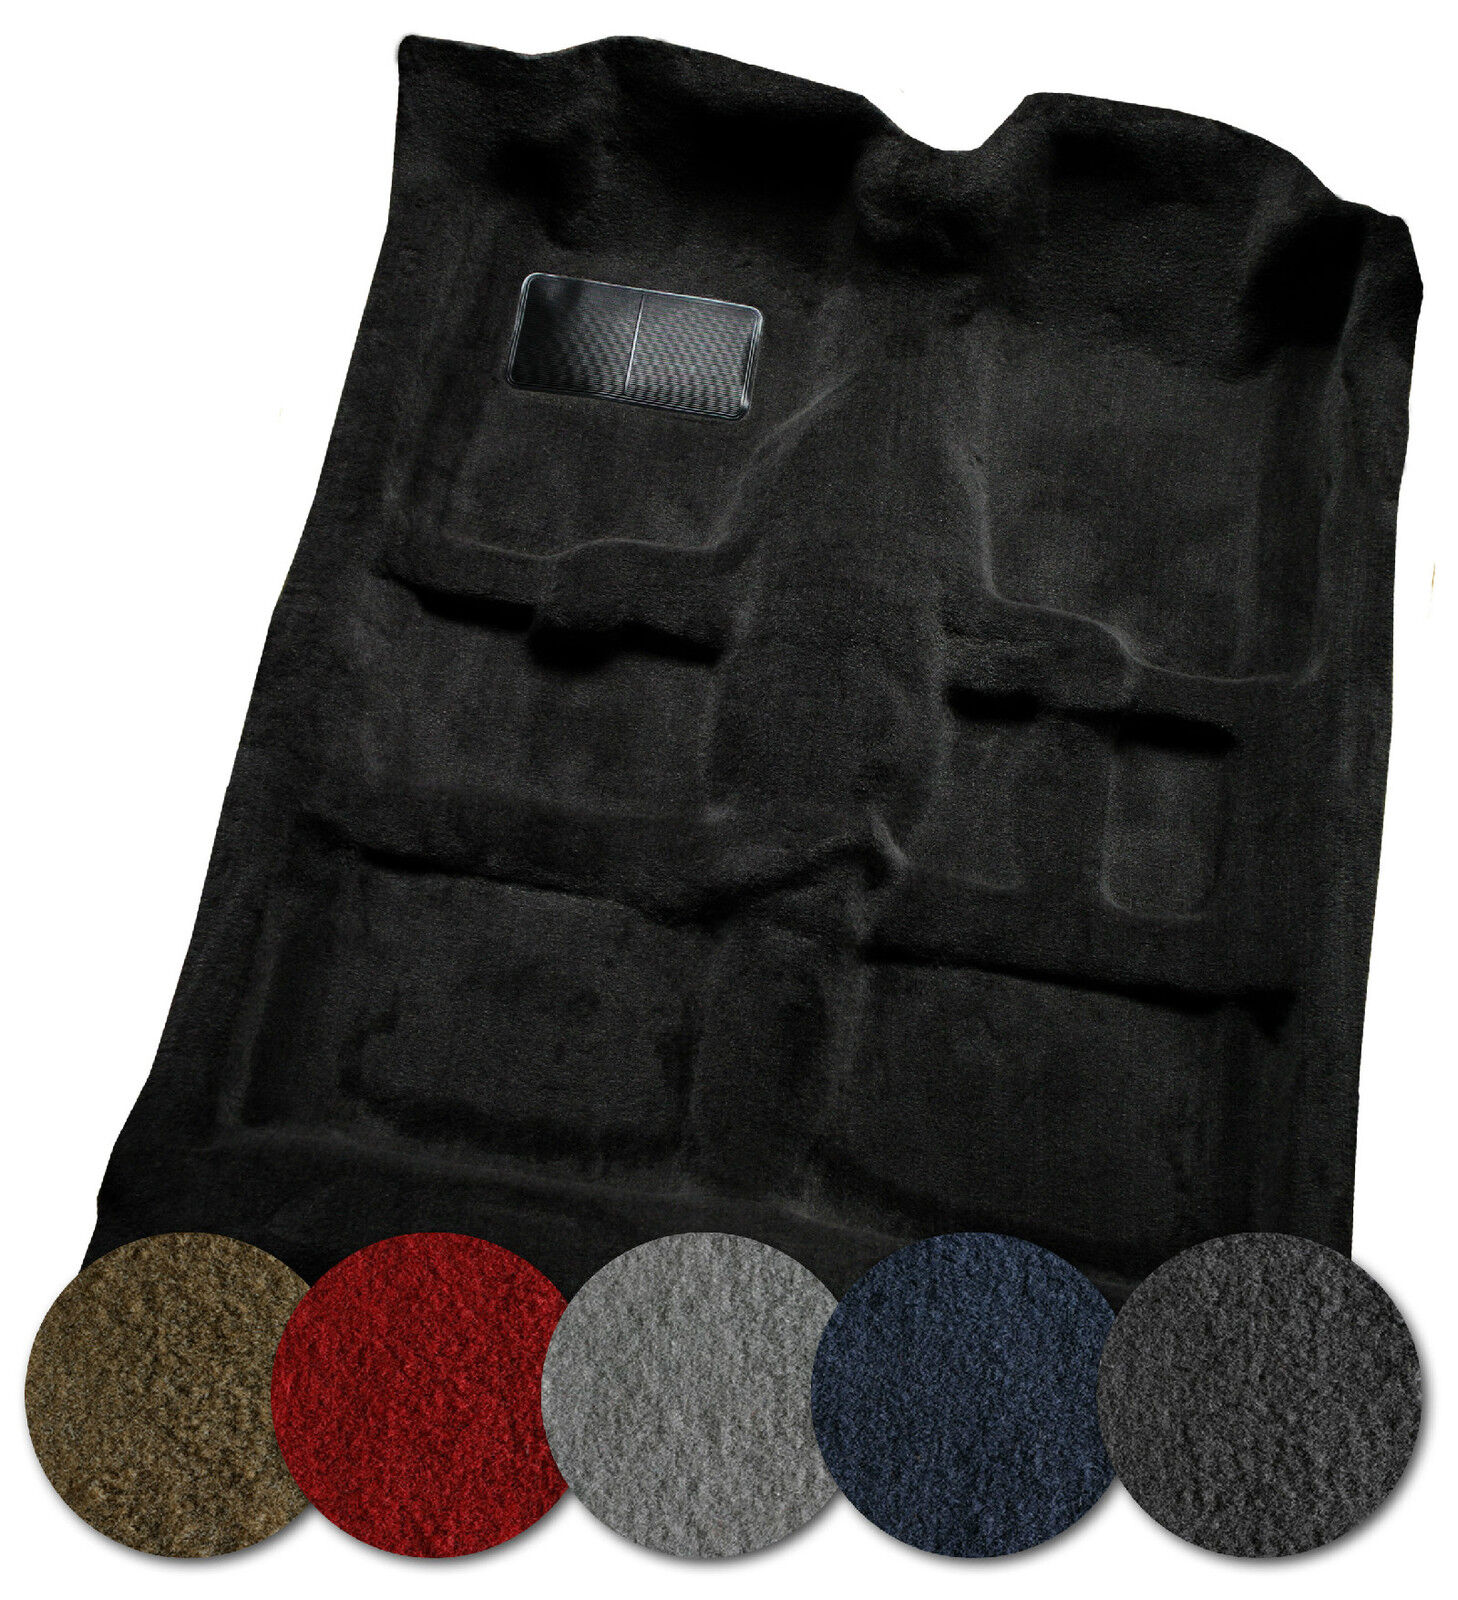 1993-1995 MAZDA RX7 CARPET PASS AREA - ANY COLOR